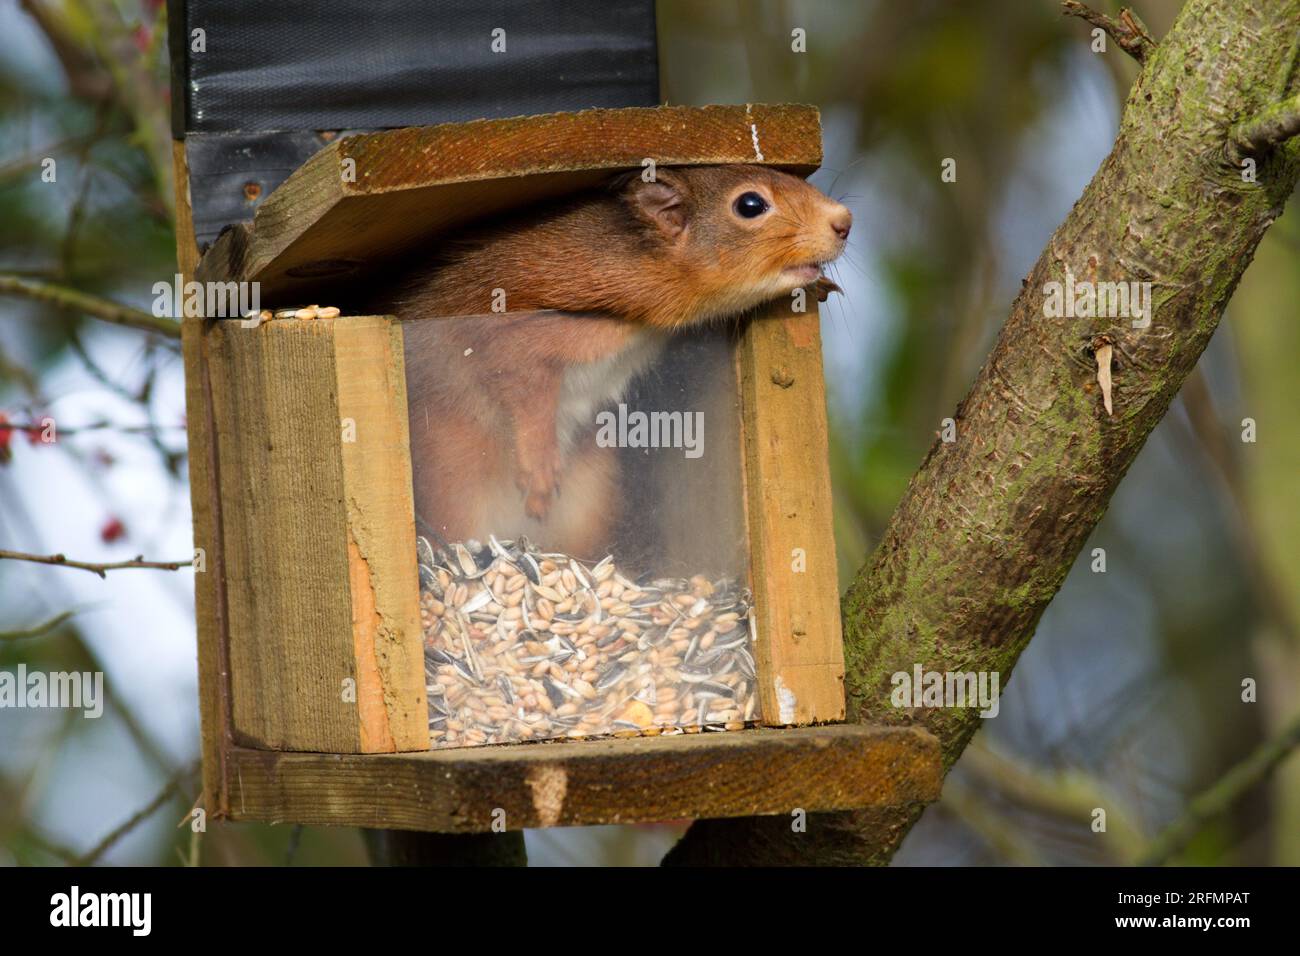 Red squirrel in the feeder! Stock Photo